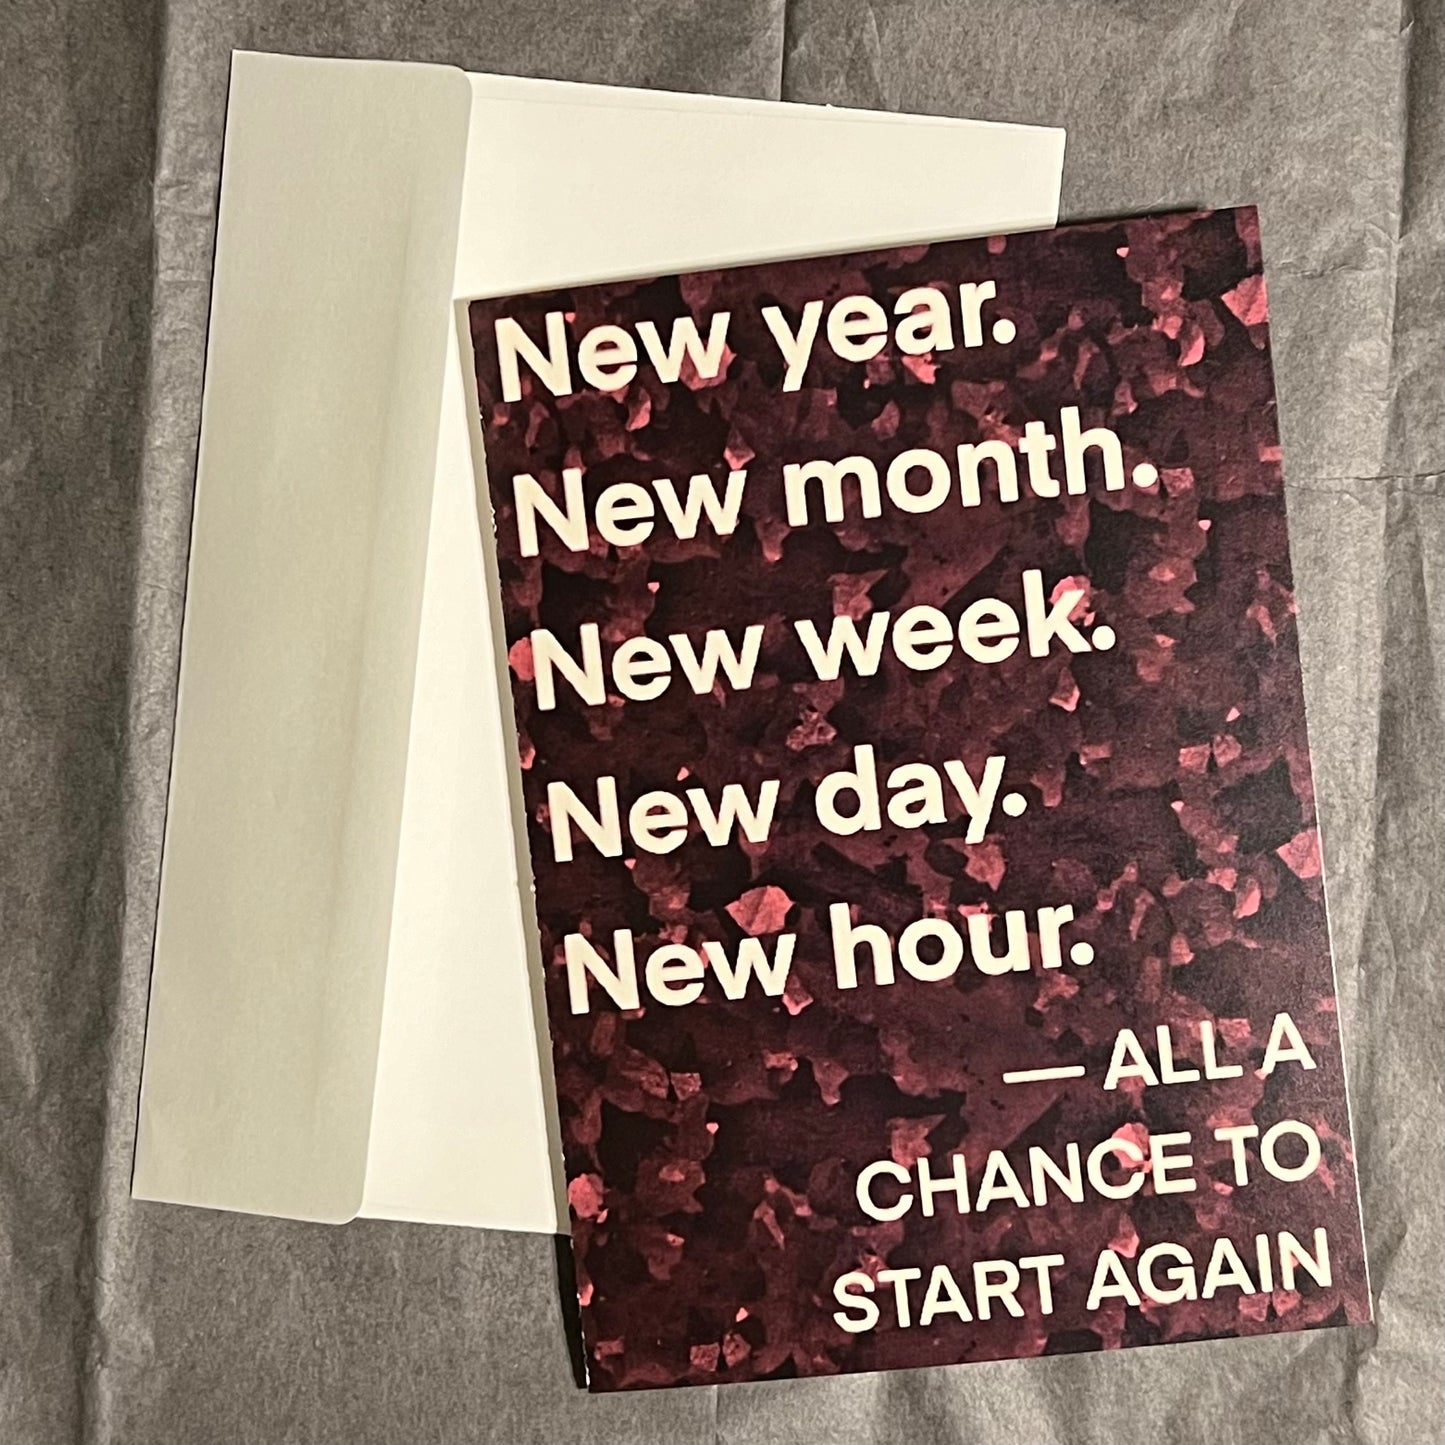 New Year. New Month. New Week. New Day. New Hour. All a chance to start again.